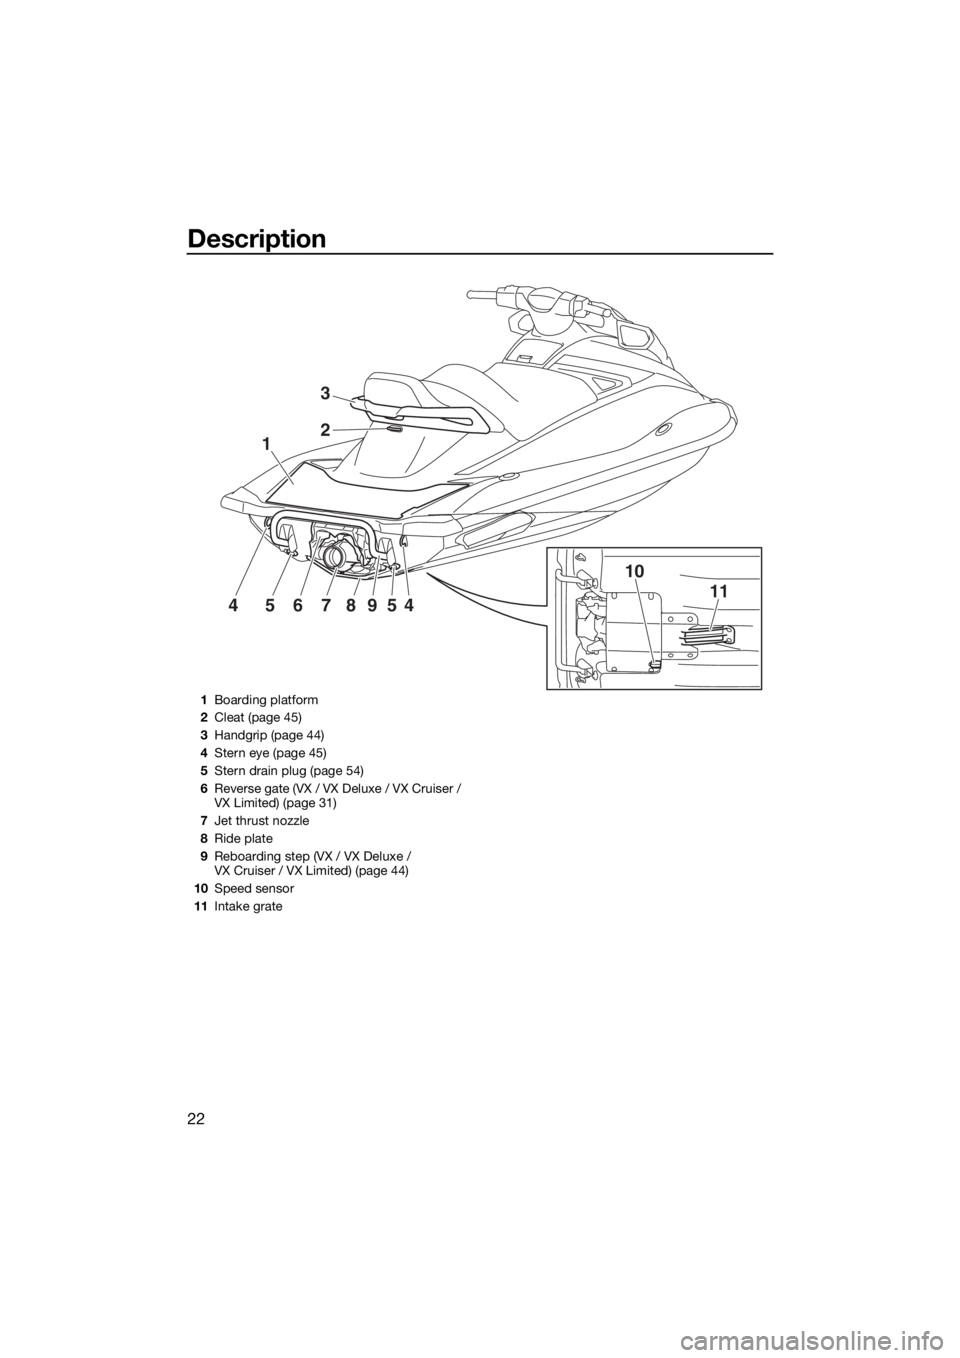 YAMAHA VX LIMITED 2019 Owners Manual Description
22
1
10
1145678954
2
3
1Boarding platform
2Cleat (page 45)
3Handgrip (page 44)
4Stern eye (page 45)
5Stern drain plug (page 54)
6Reverse gate (VX / VX Deluxe / VX Cruiser / 
VX Limited) (p